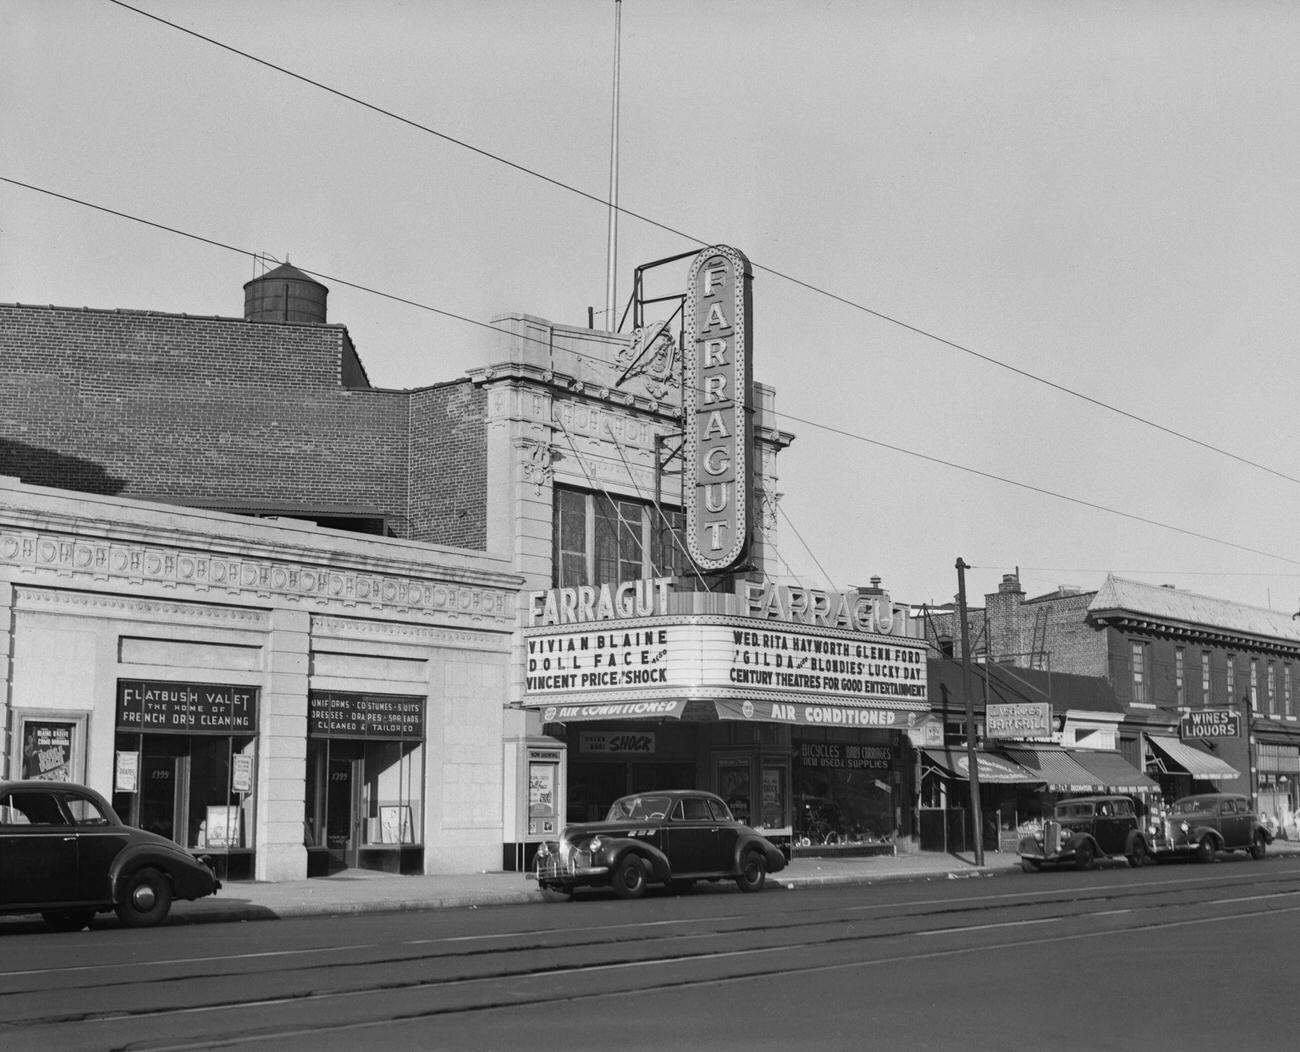 The Farragut Theatre At 1401 Flatbush Avenue In Brooklyn, 1946. The Movies Showing Are 'Doll Face' Starring Vivian Blaine, 'Shock' Starring Vincent Price, And 'Gilda' Starring Rita Hayworth And Glenn Ford.